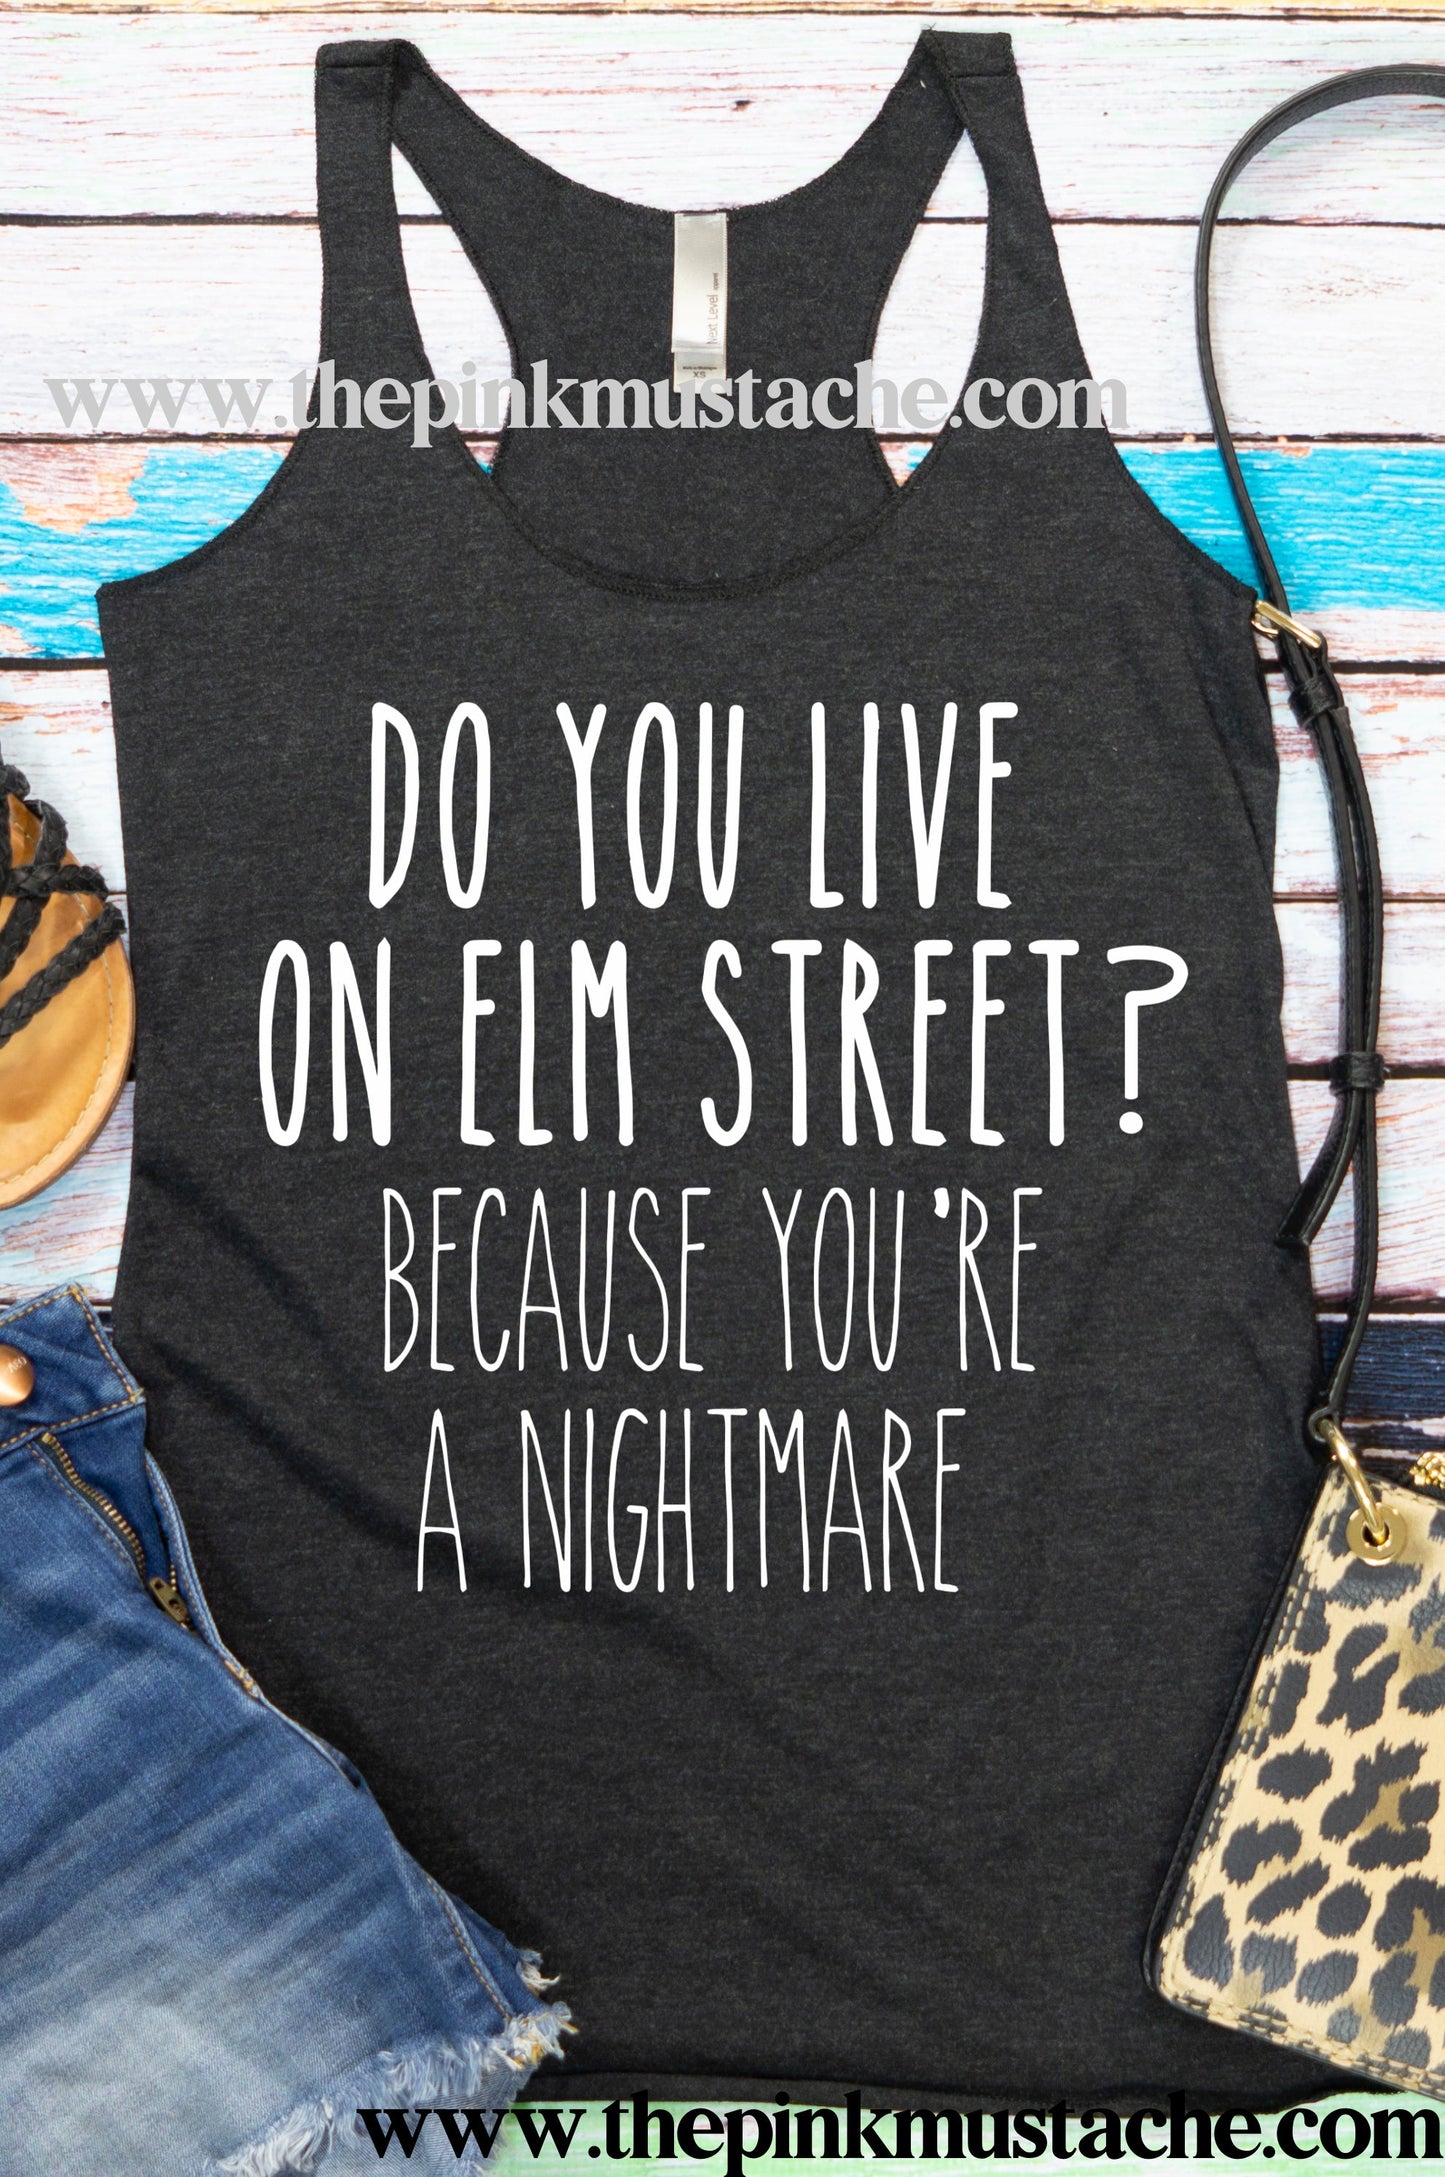 Do You Live On Elm Street? Because  You're A Nightmare - Funny Racerback Tank / Halloween